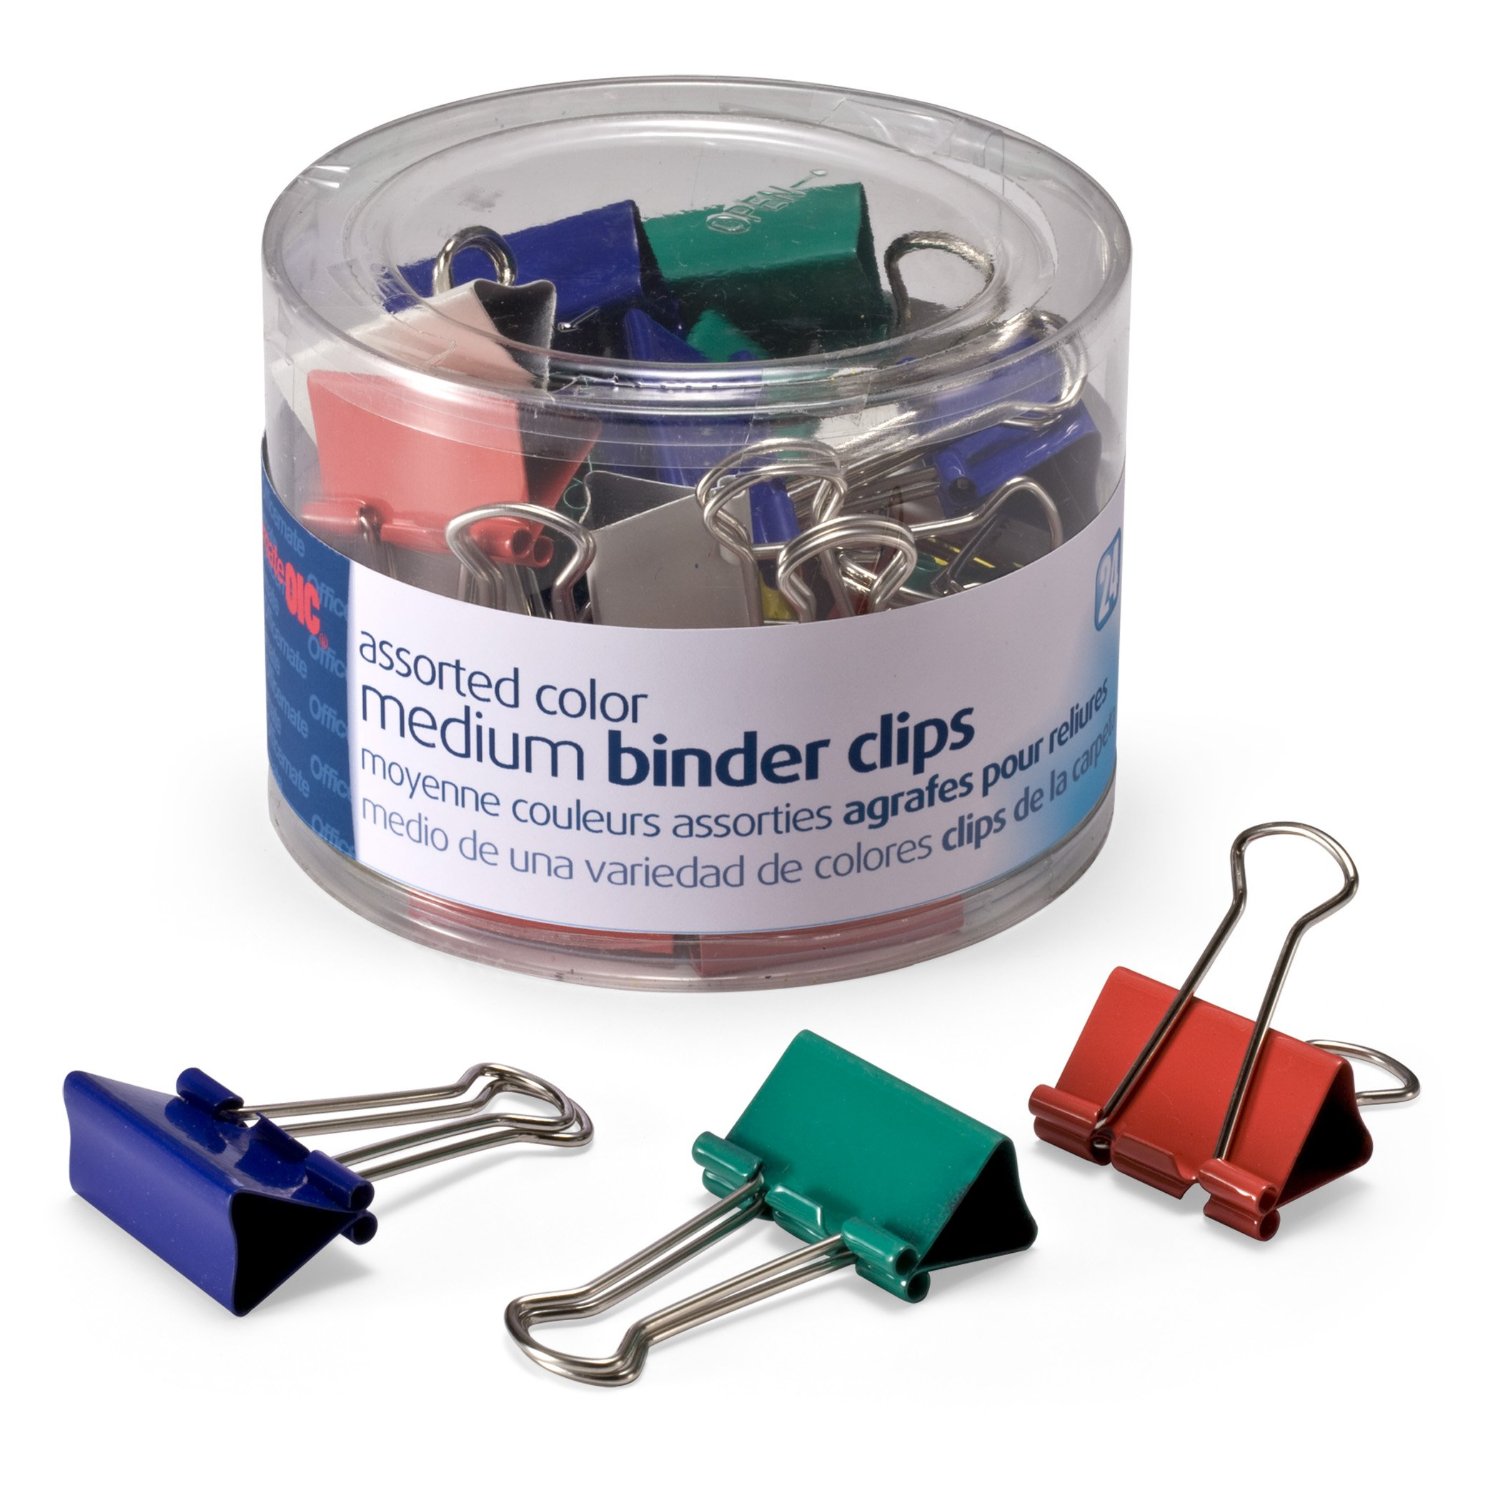 24 clips packed in a reusable desktop or drawer tub